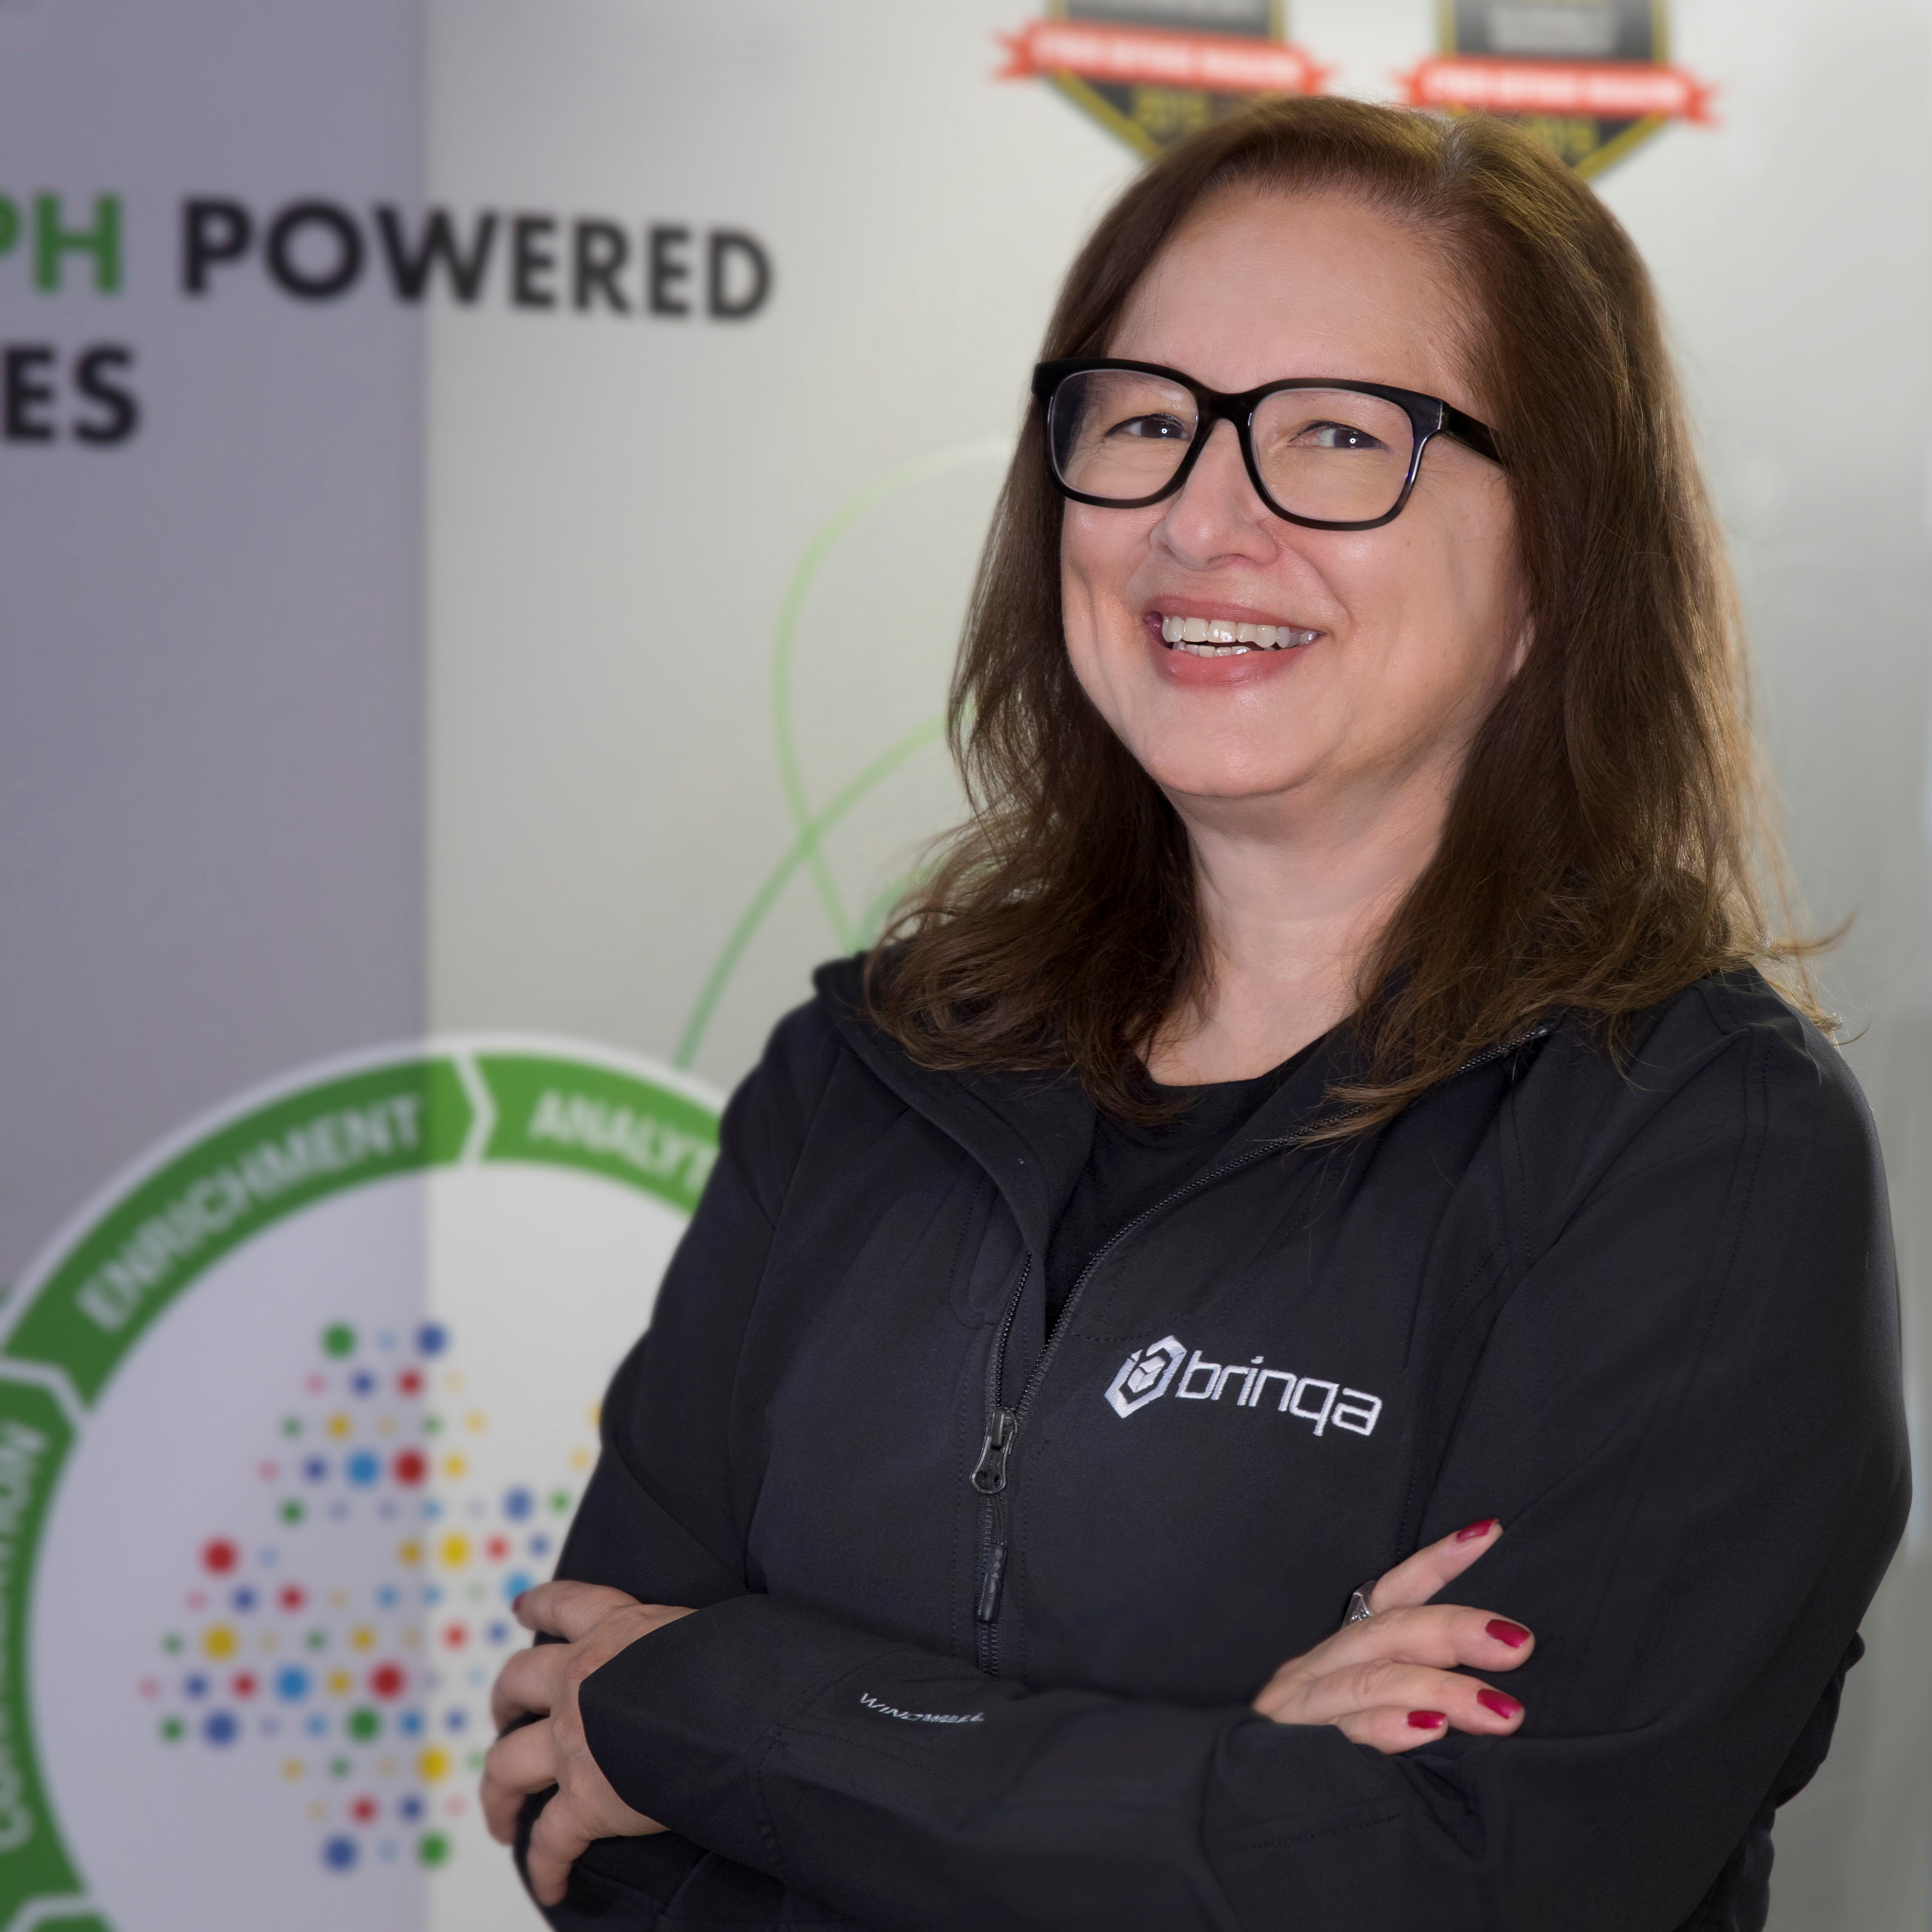 Co-founder and president of cybersecurity startup Brinqa Hilda Perez poses in a jacket with the company logo